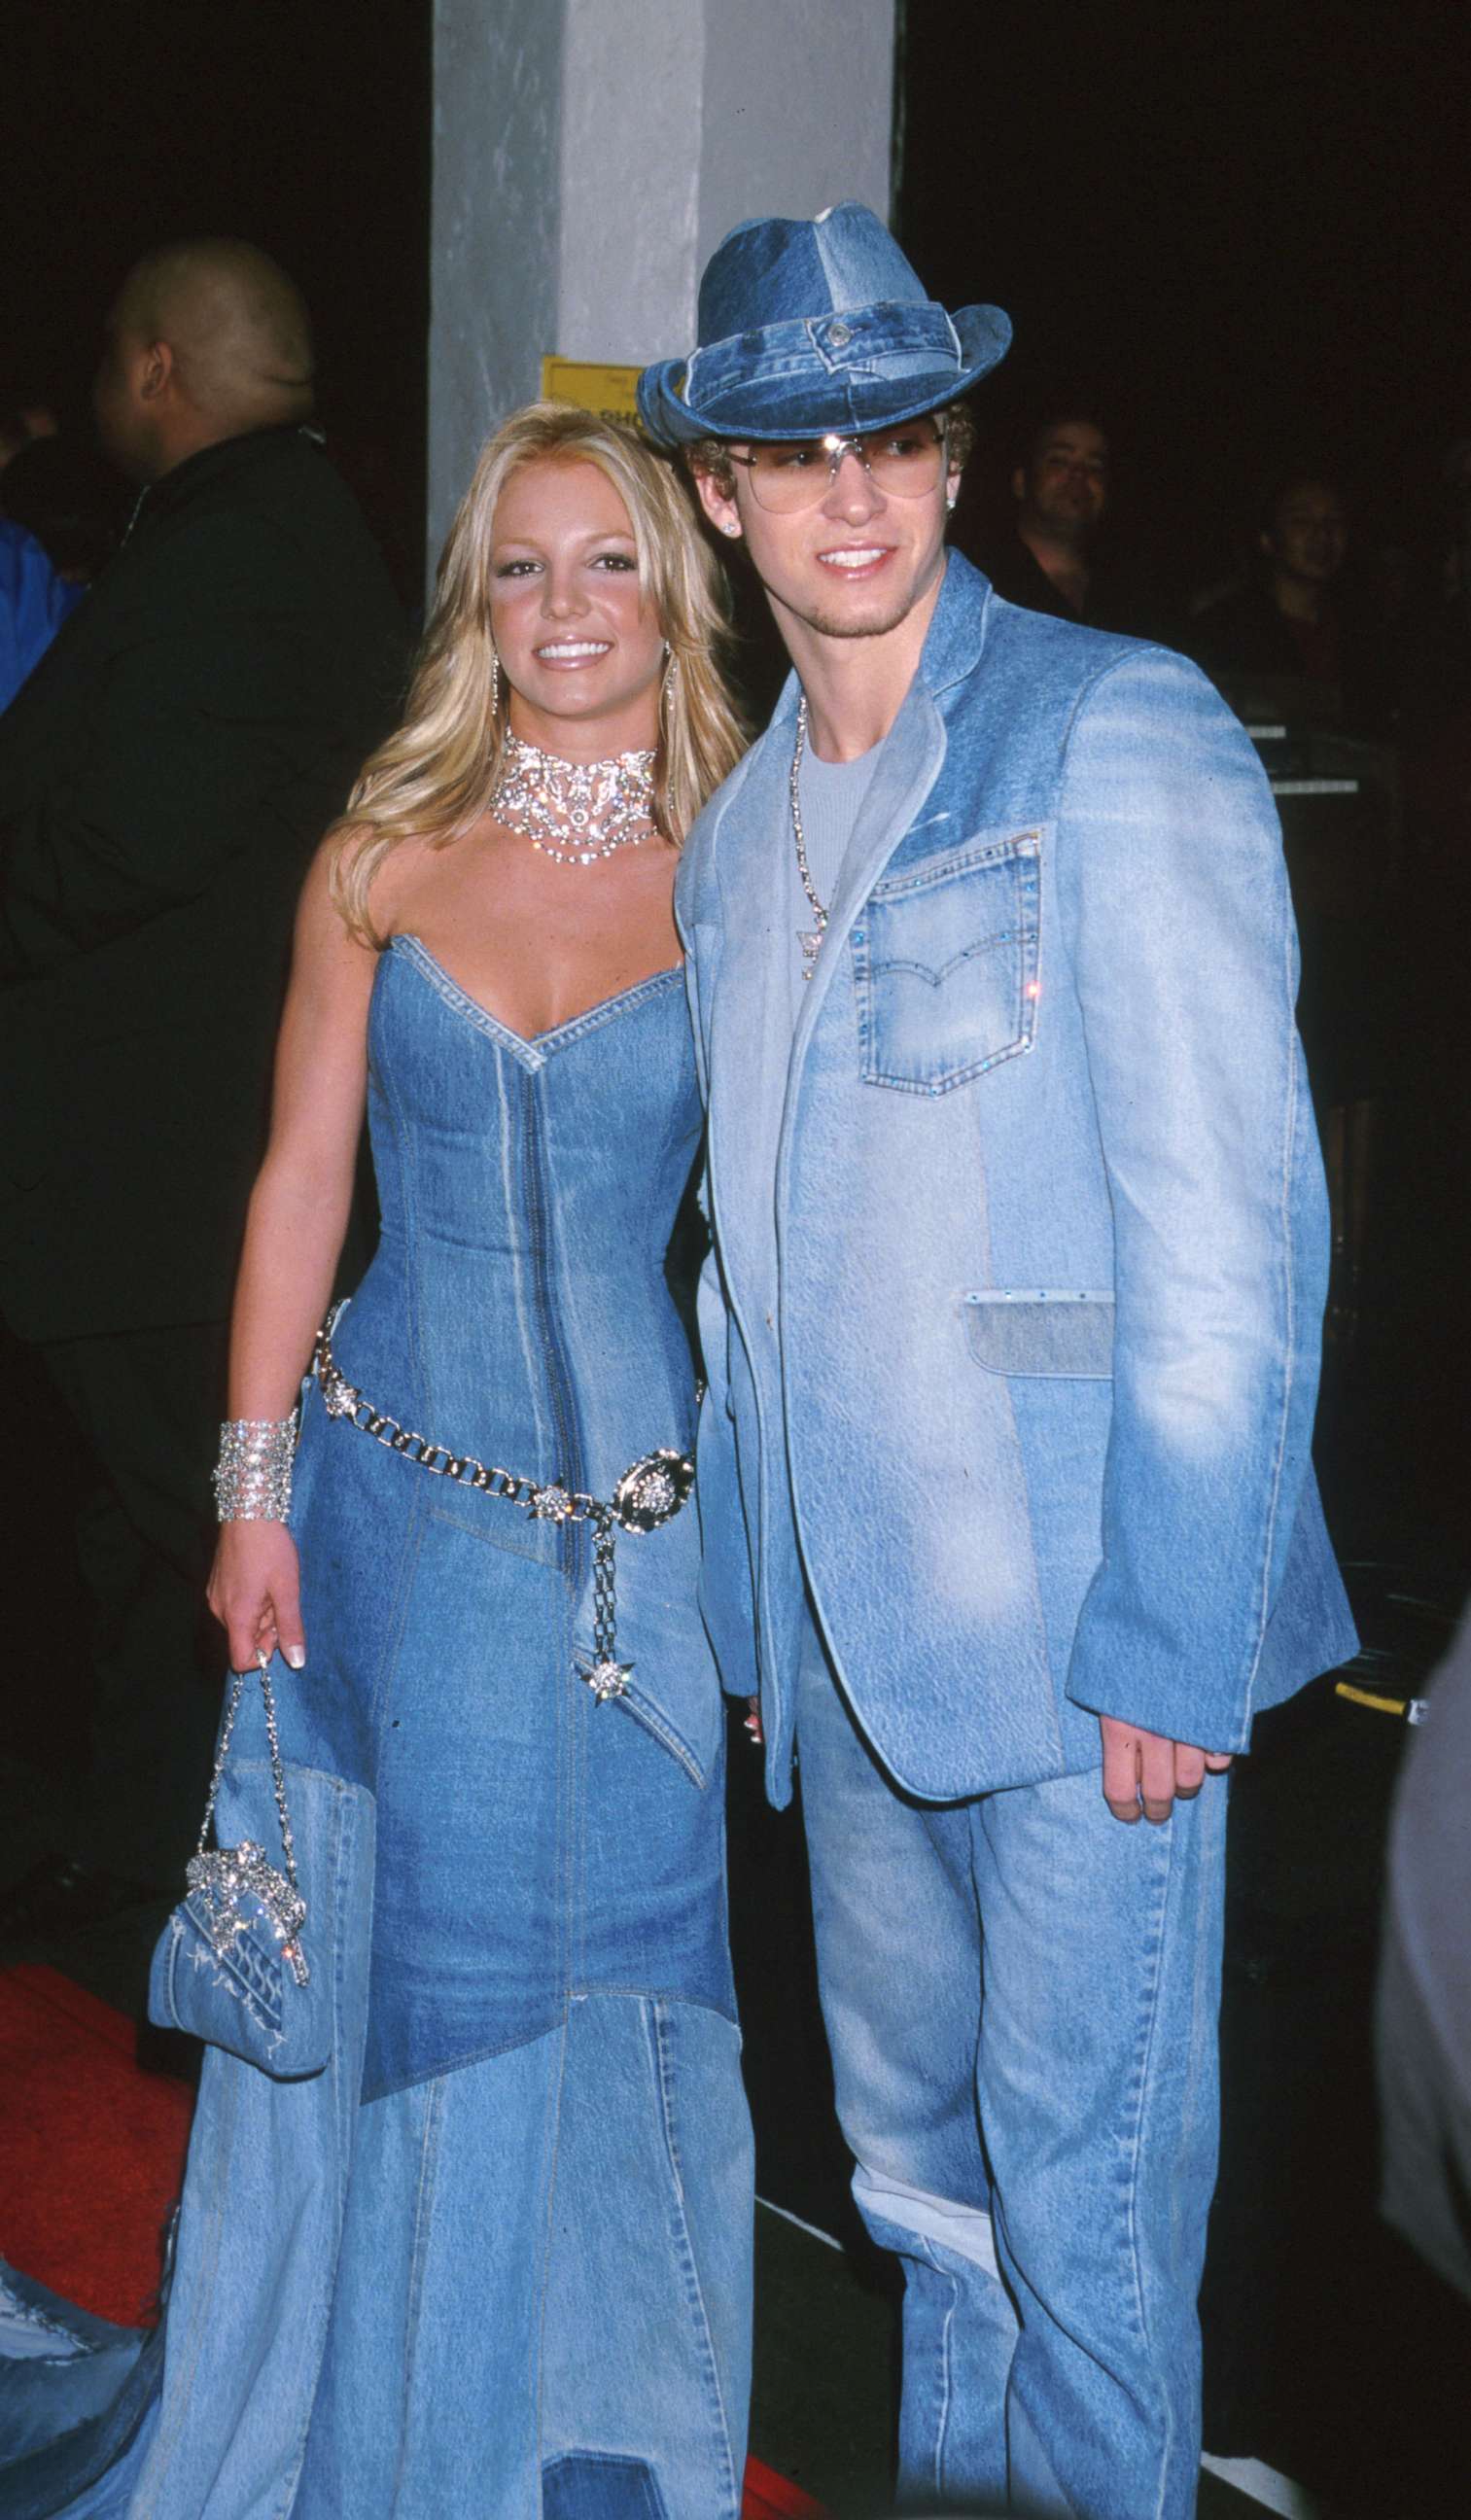 PHOTO: In this Jan. 8, 2001, file photo, Britney Spears & Justin Timberlake appear at the American Music Awards in Los Angeles.